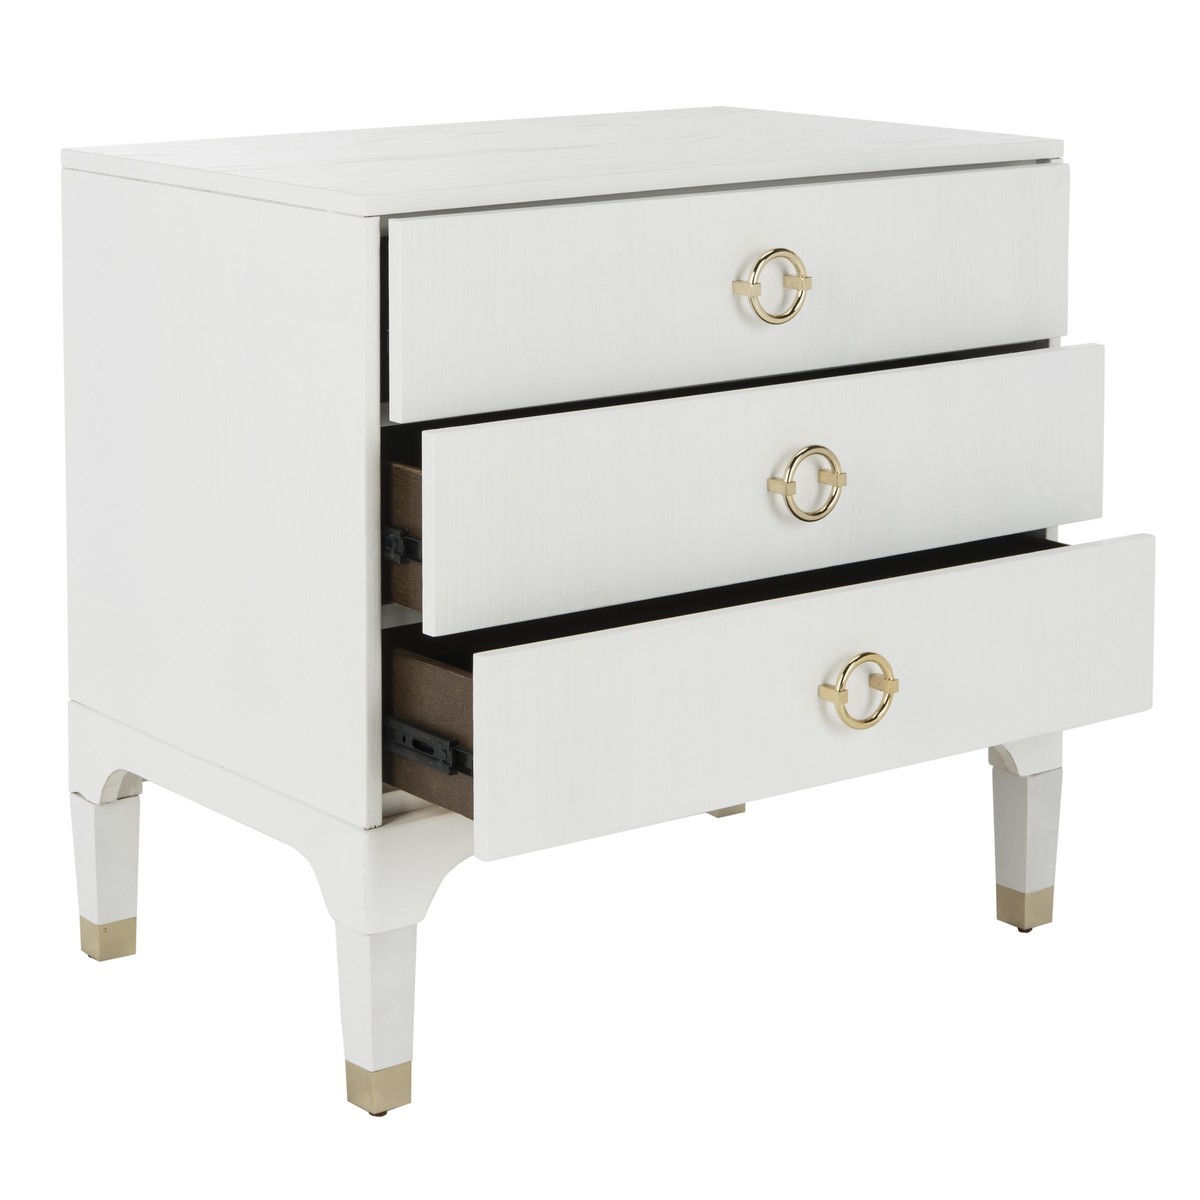 Lorna 3-Drawer Contemporary Night Stand, White - Image 2